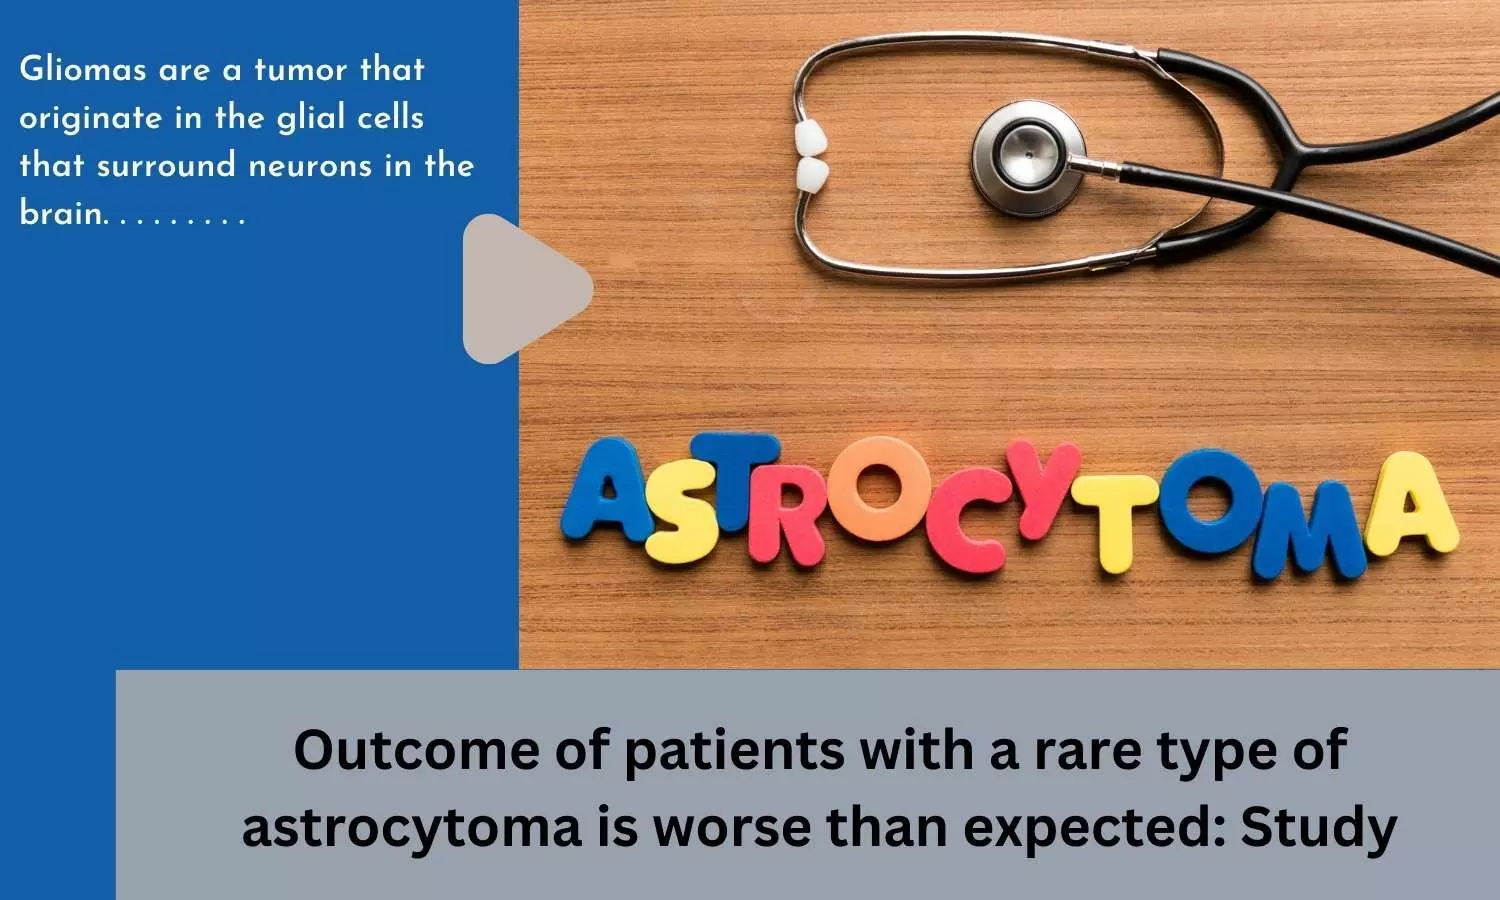 Outcome of patients with a rare type of astrocytoma is worse than expected: Study